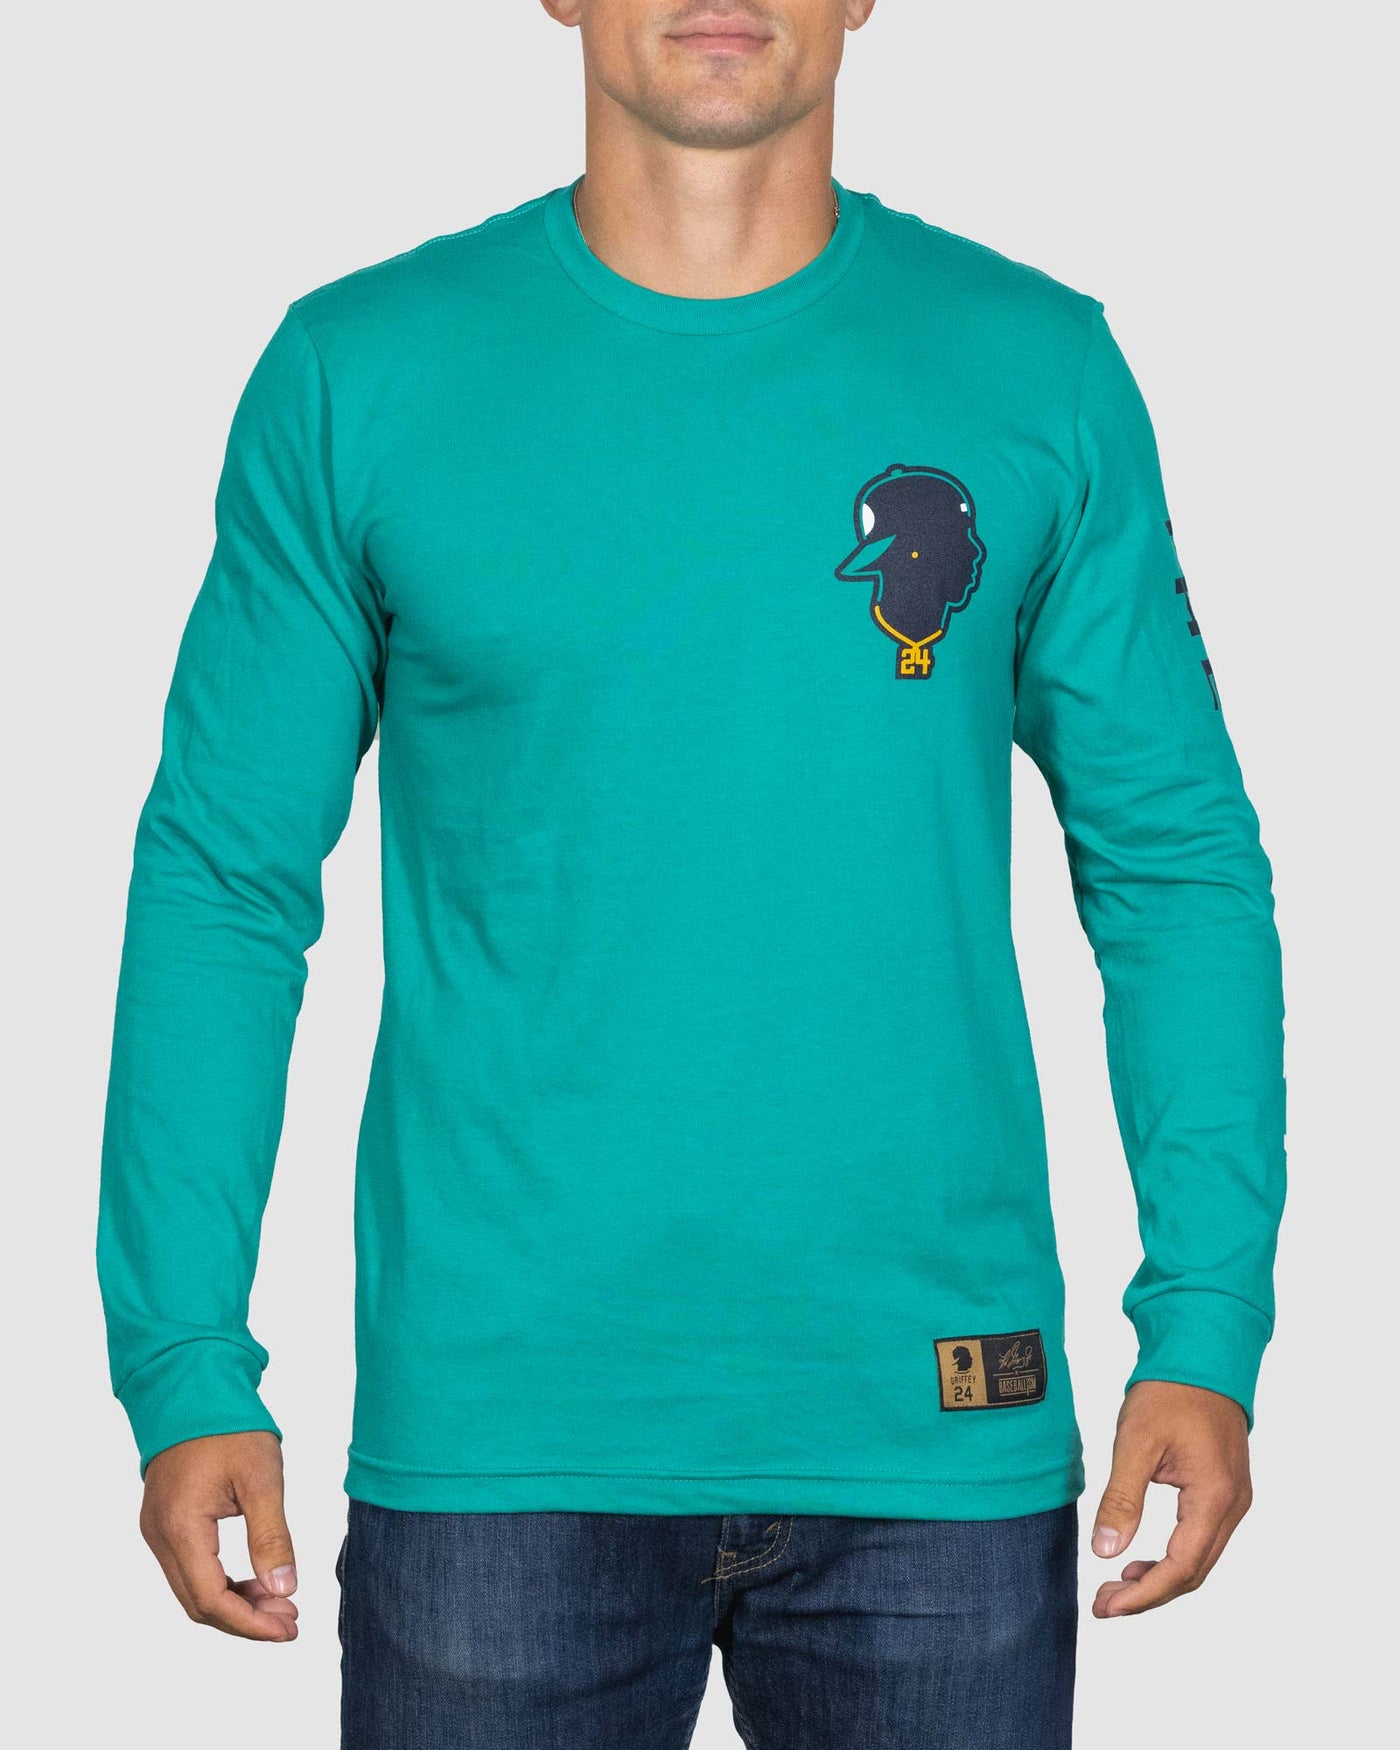 The Kid Long Sleeve - Ken Griffey Jr. Collection